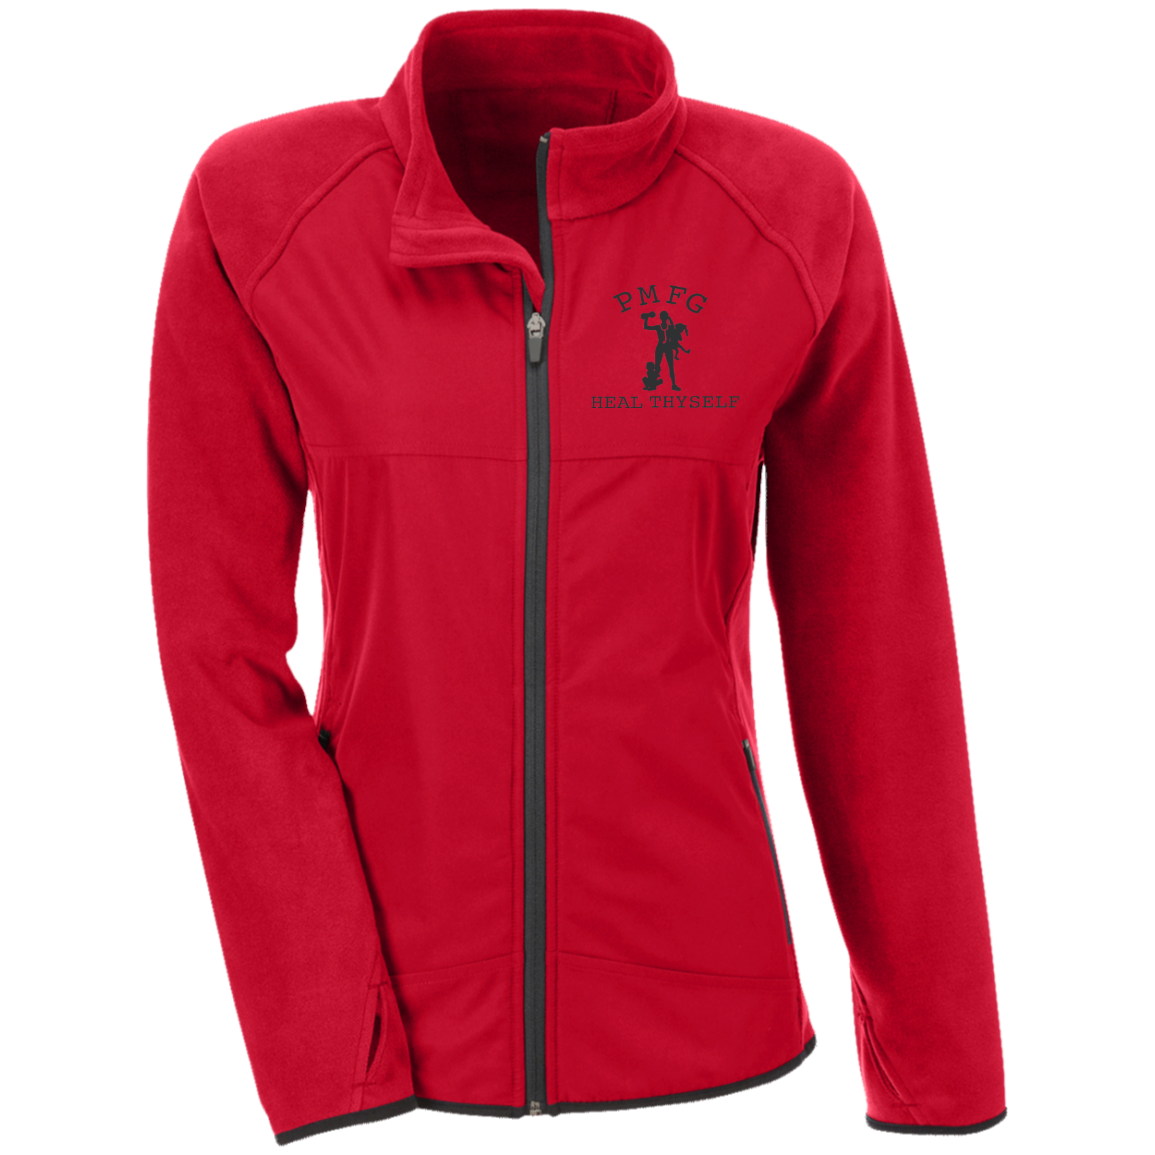 PMFG Ladies' Microfleece with Front Polyester Overlay